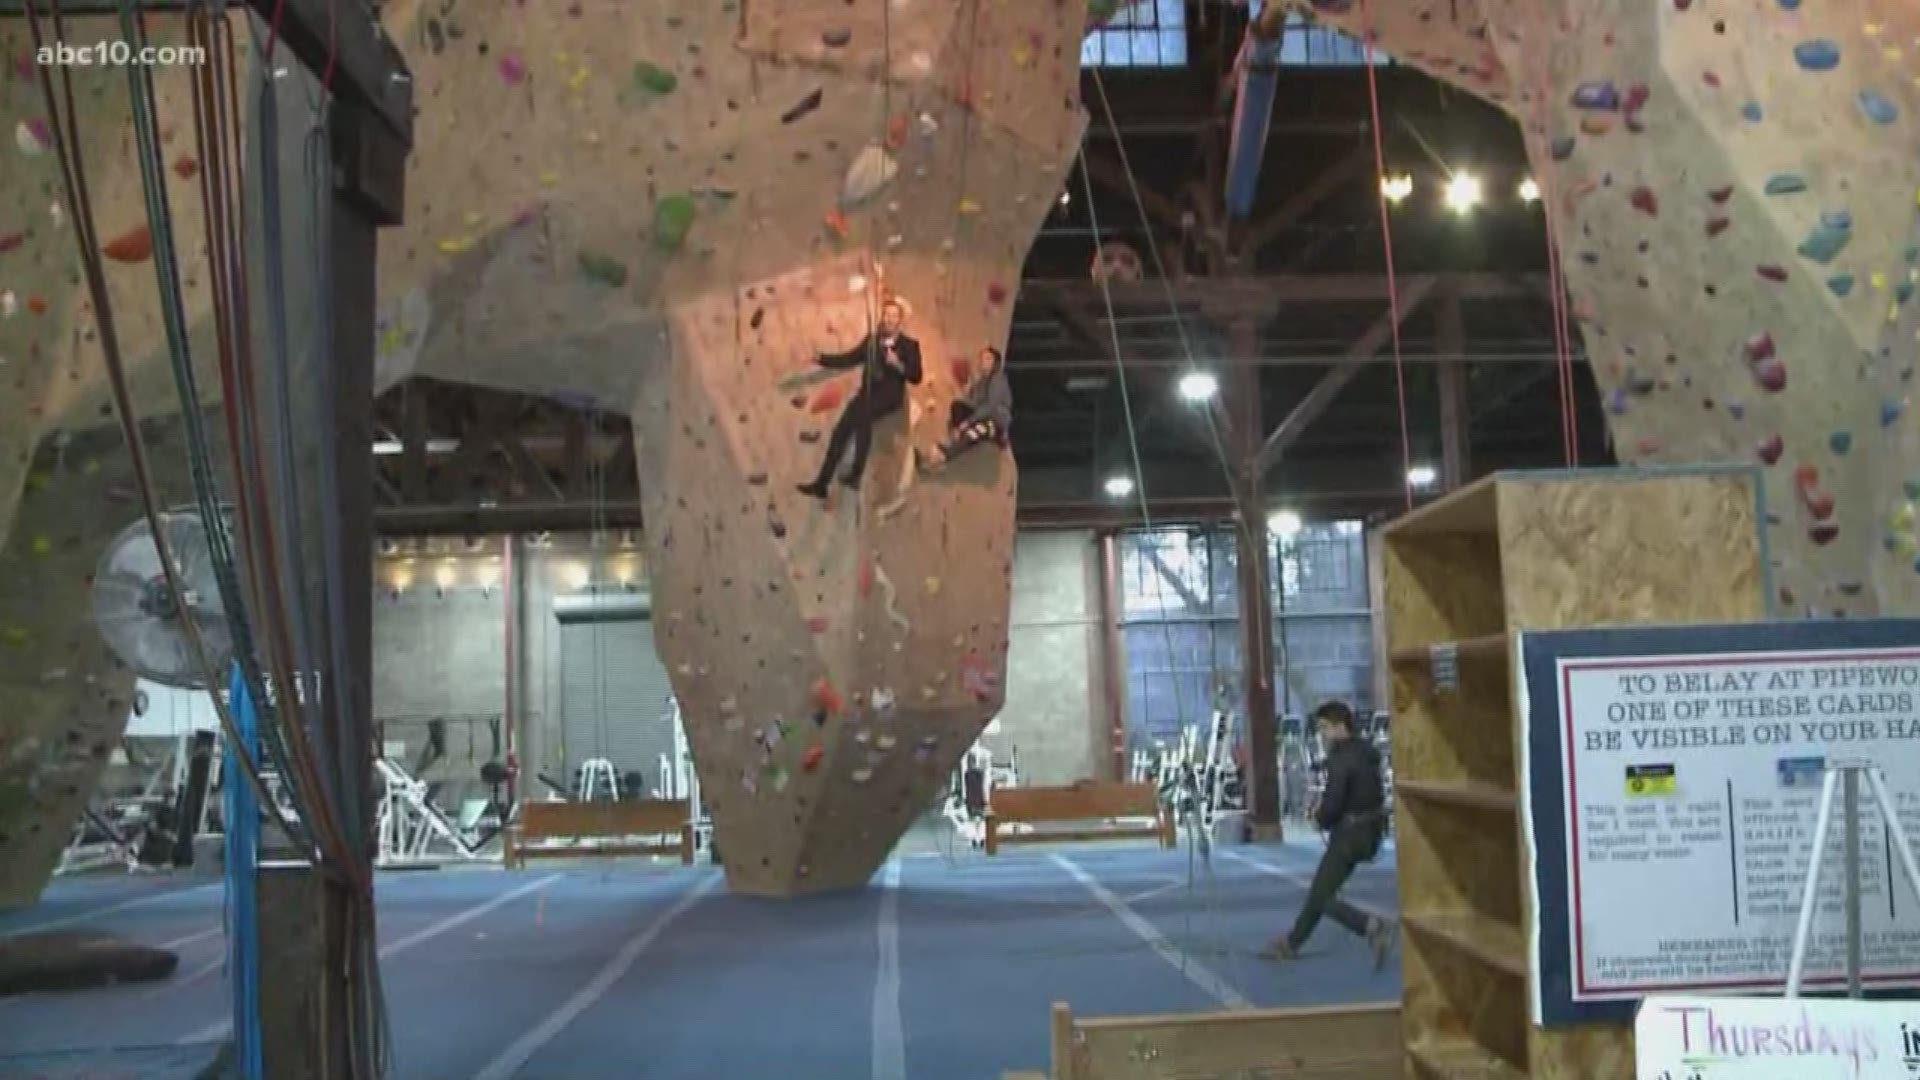 Mark S. Allen is hanging out with climbers at Pipeworks in downtown Sacramento for National Hangout Day. 